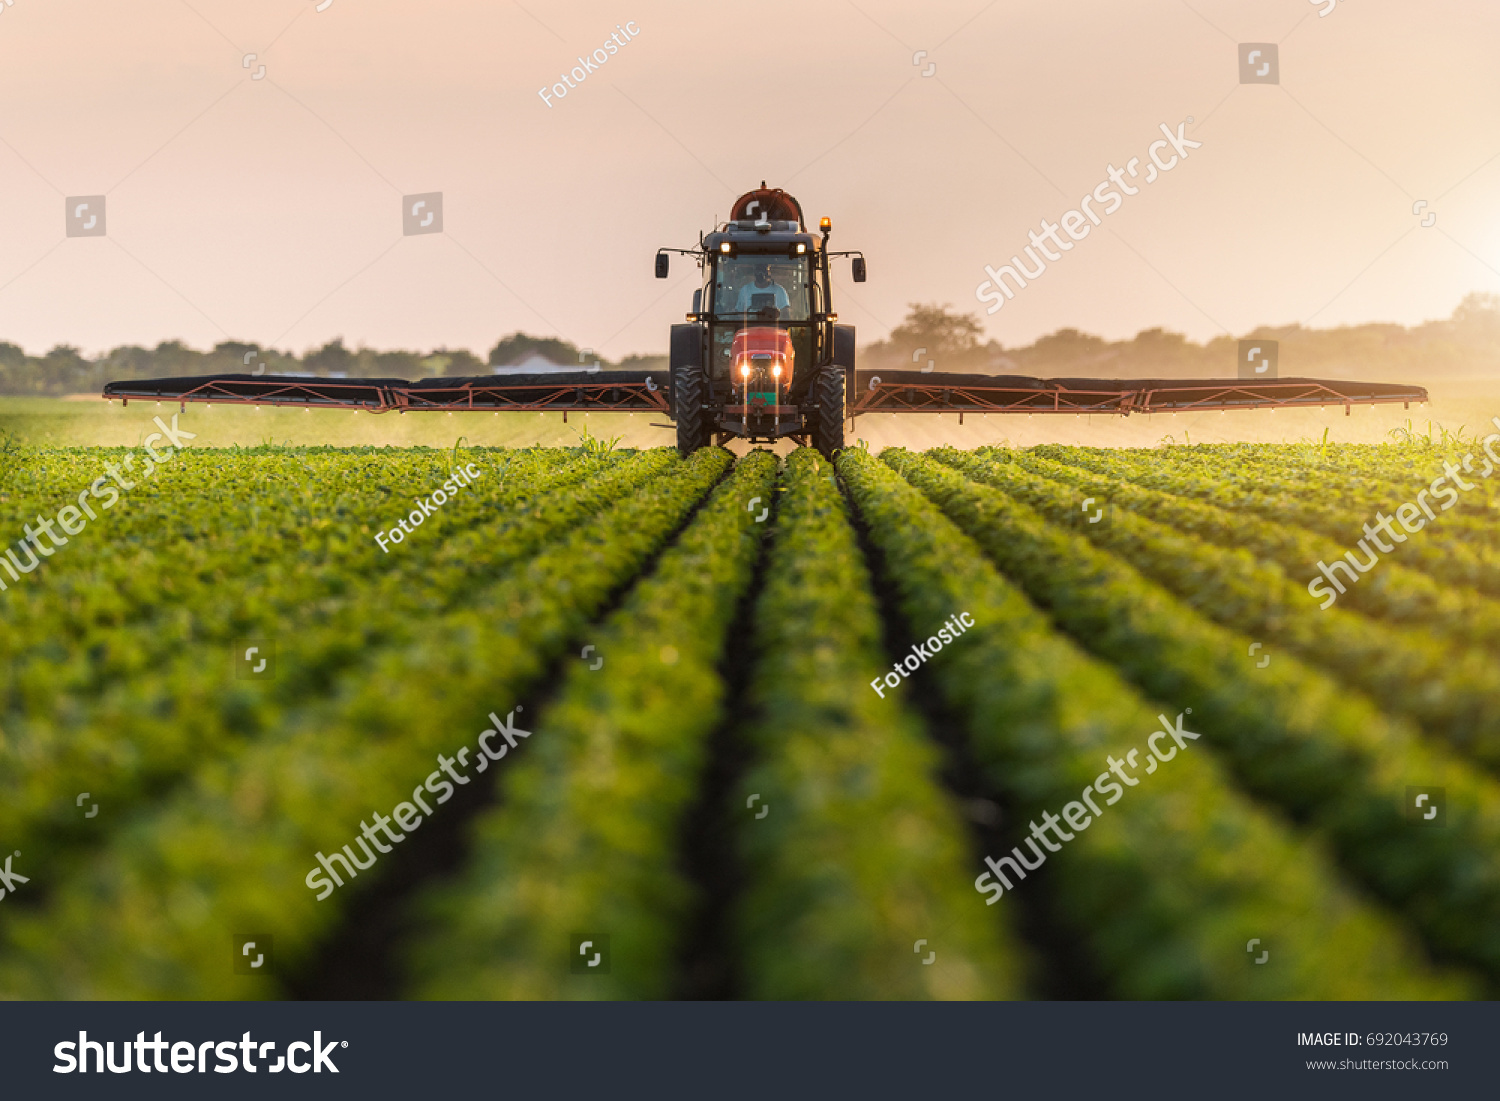 Tractor spraying pesticides on soybean field  with sprayer at spring #692043769